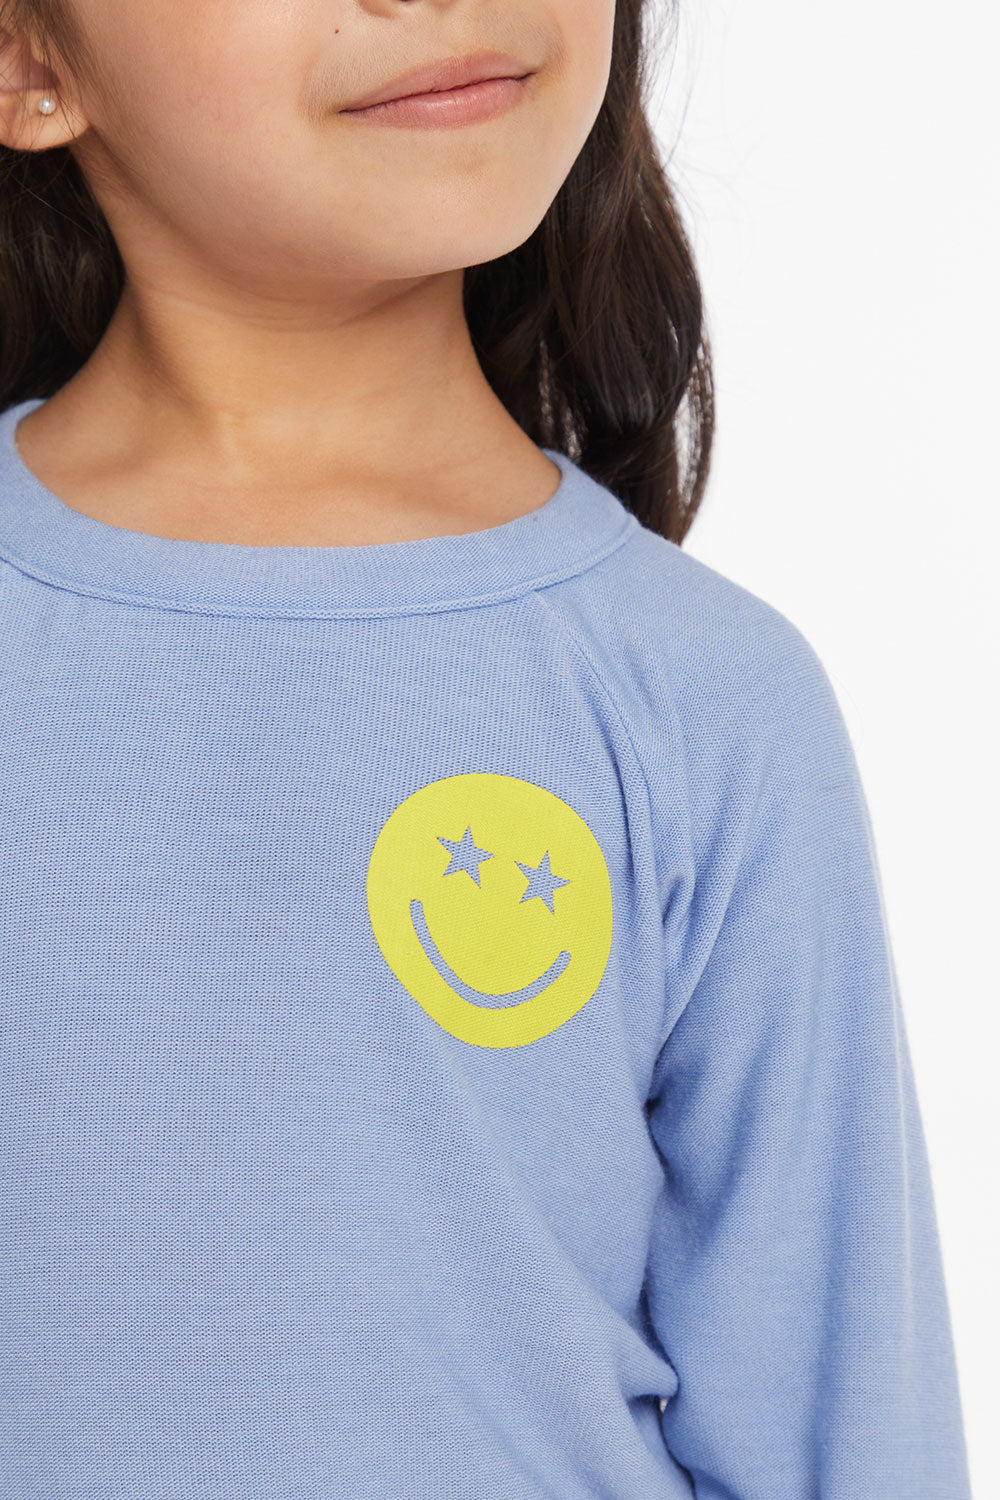 Stars Smiley Cozy Knit Girls Pullover Girls chaserbrand